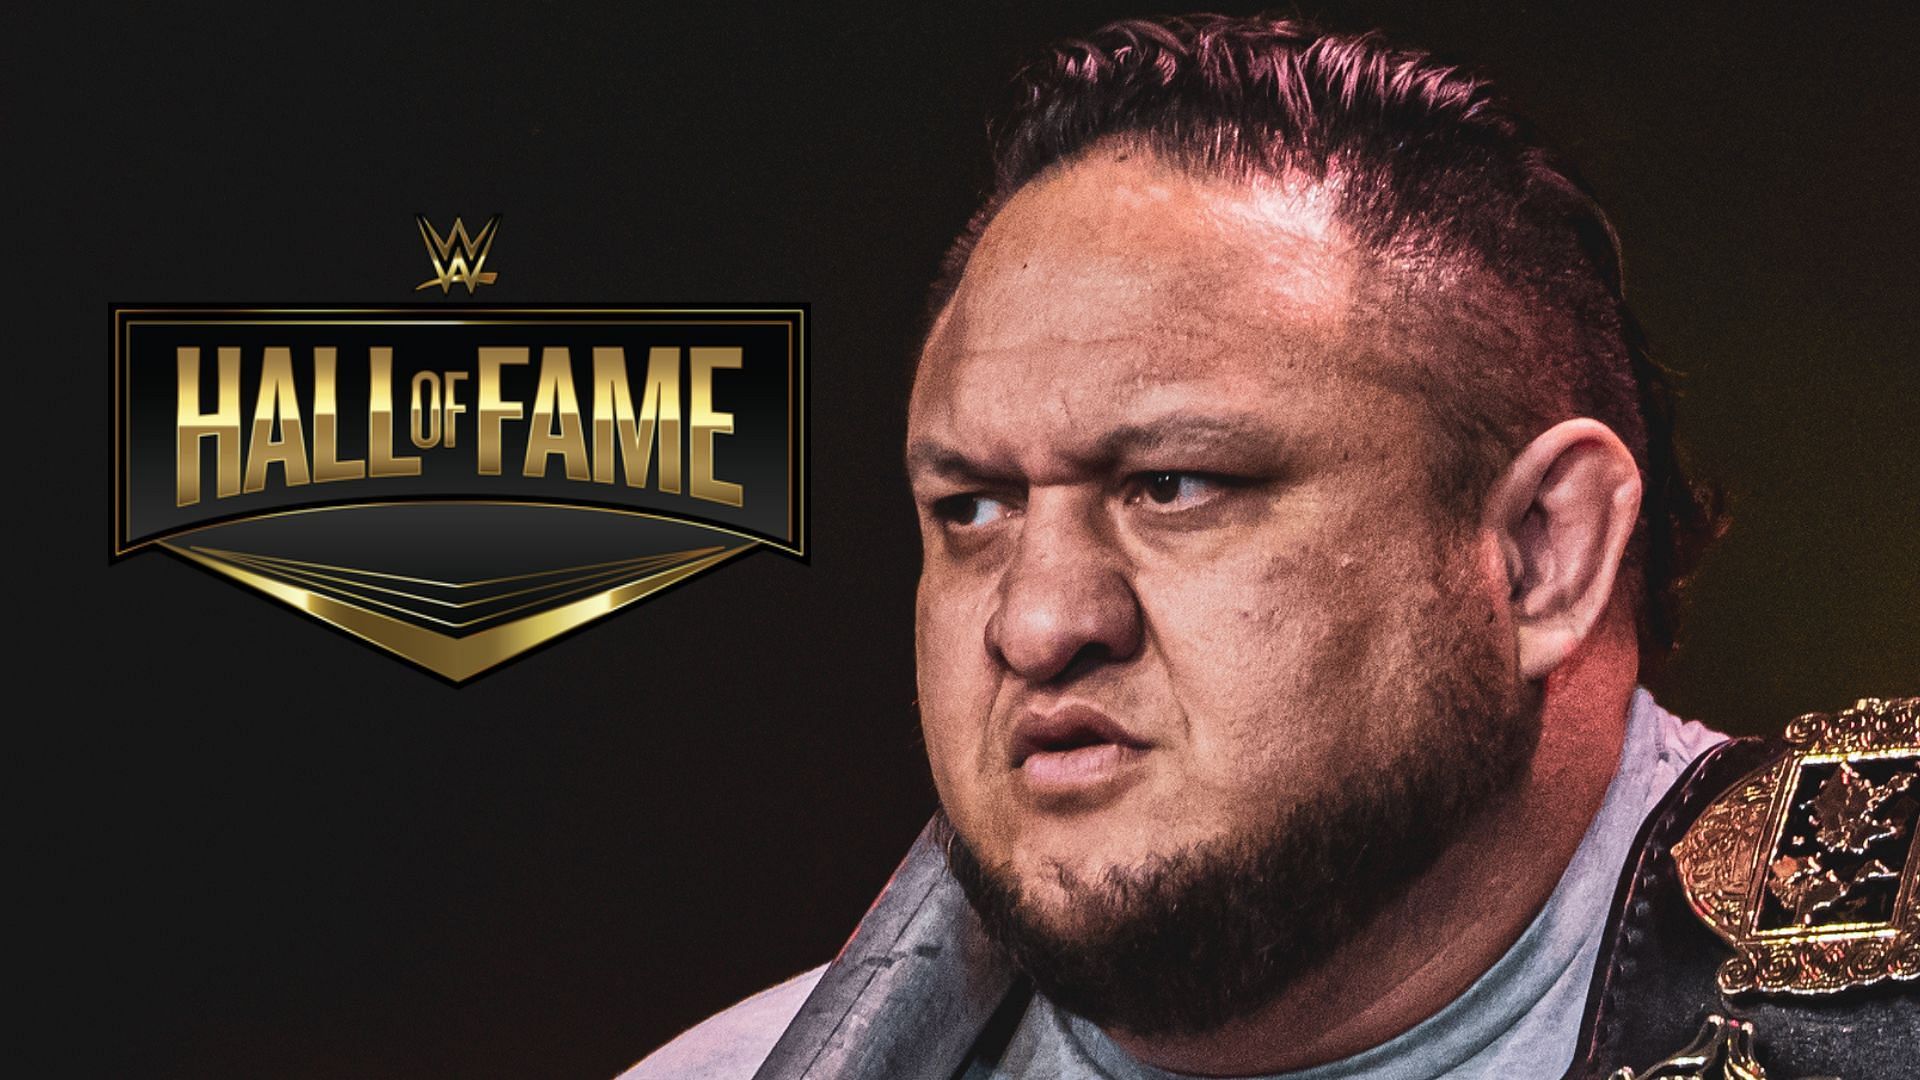 Which WWE Hall of Famer called Smaoa Joe a &quot;half-breed?&quot;